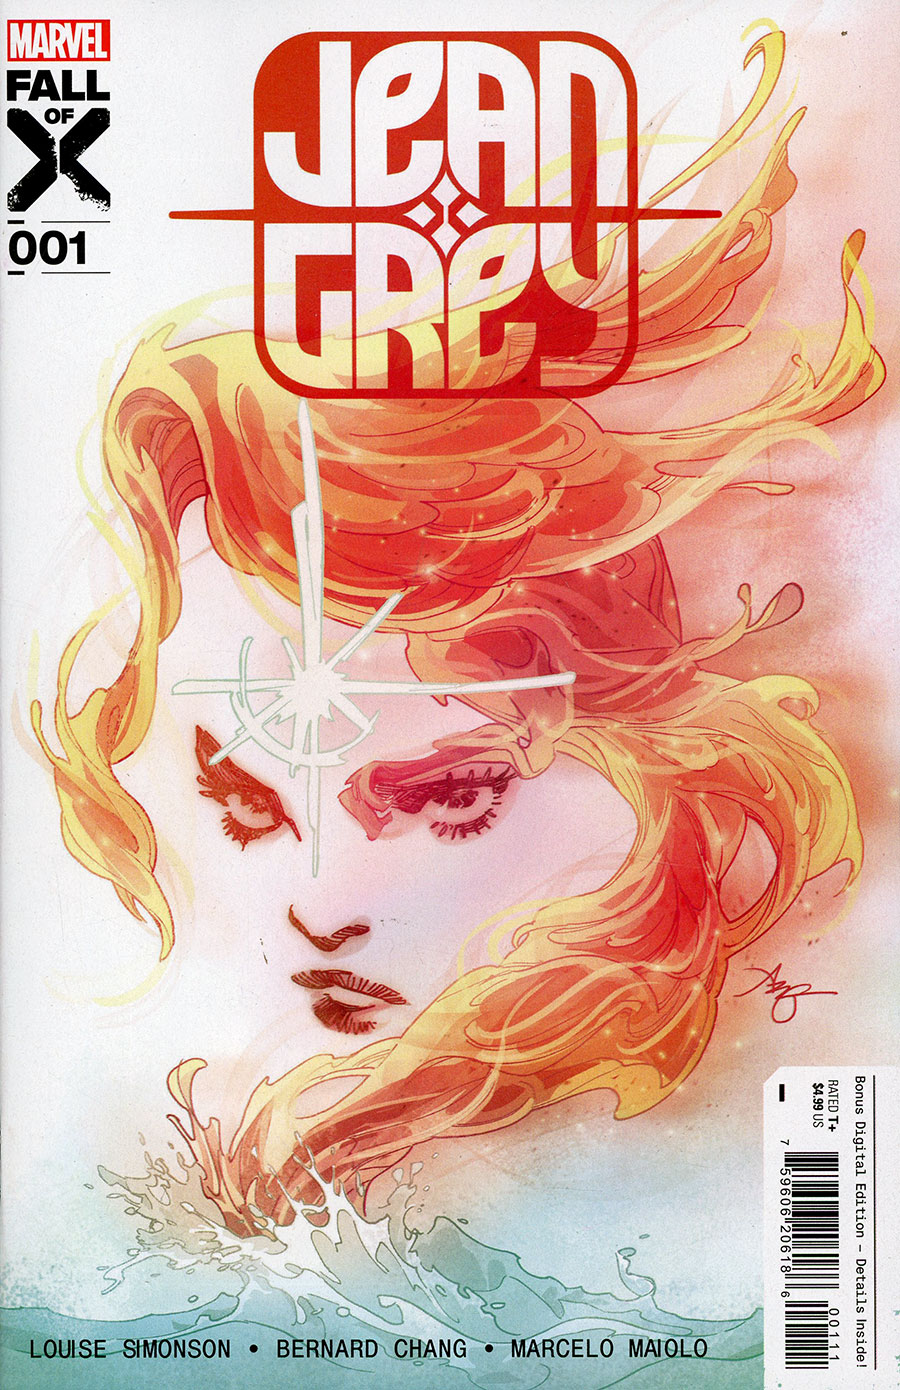 Jean Grey Vol 2 #1 Cover A Regular Amy Reeder Cover (Fall Of X Tie-In)